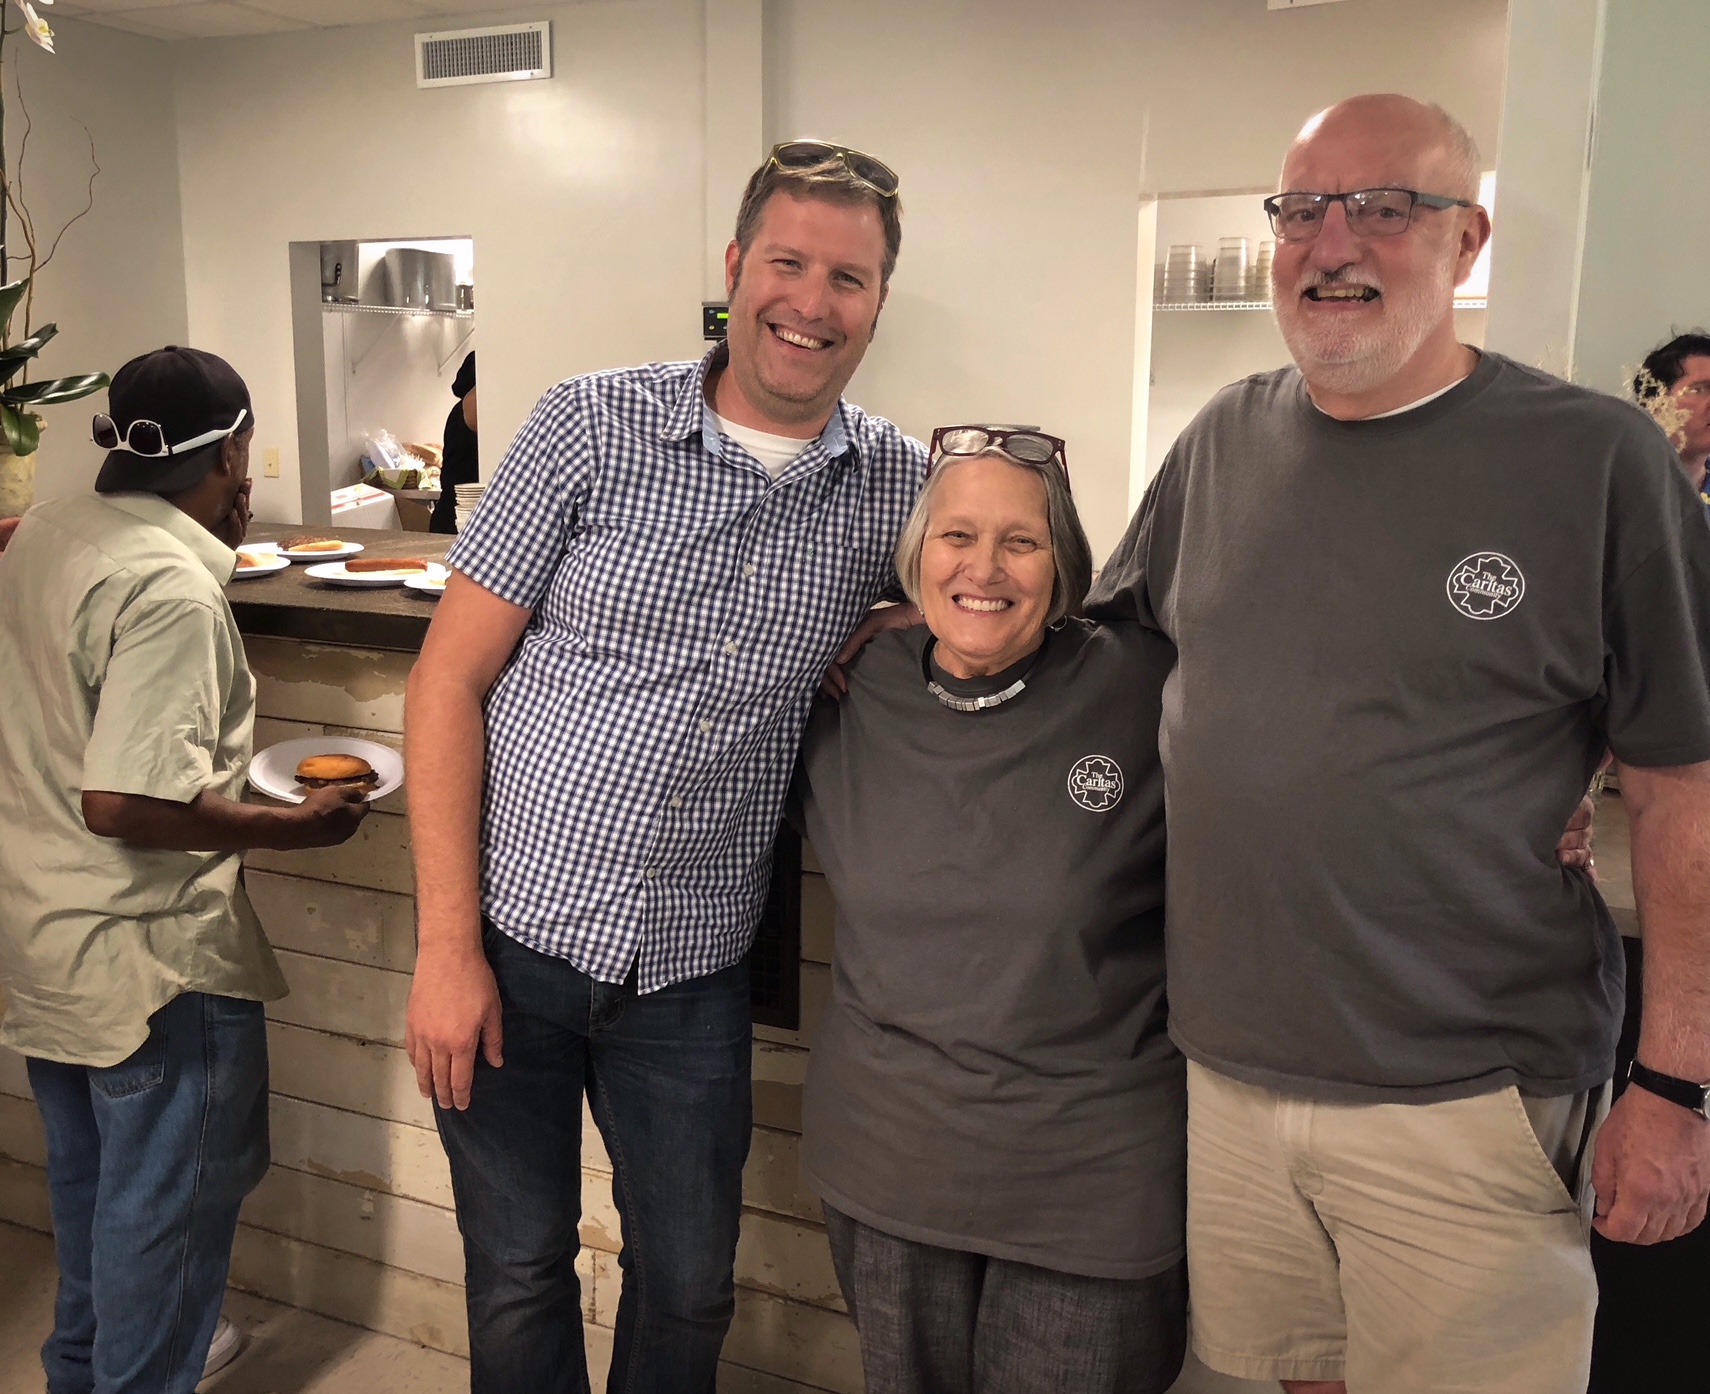 (L to R) Board member Peter Hossler, founder Onie Johns, and executive director Mac Edwards pose in front of the new cafe counter as a neighbor grabs a burger. (Shelda Edwards) 